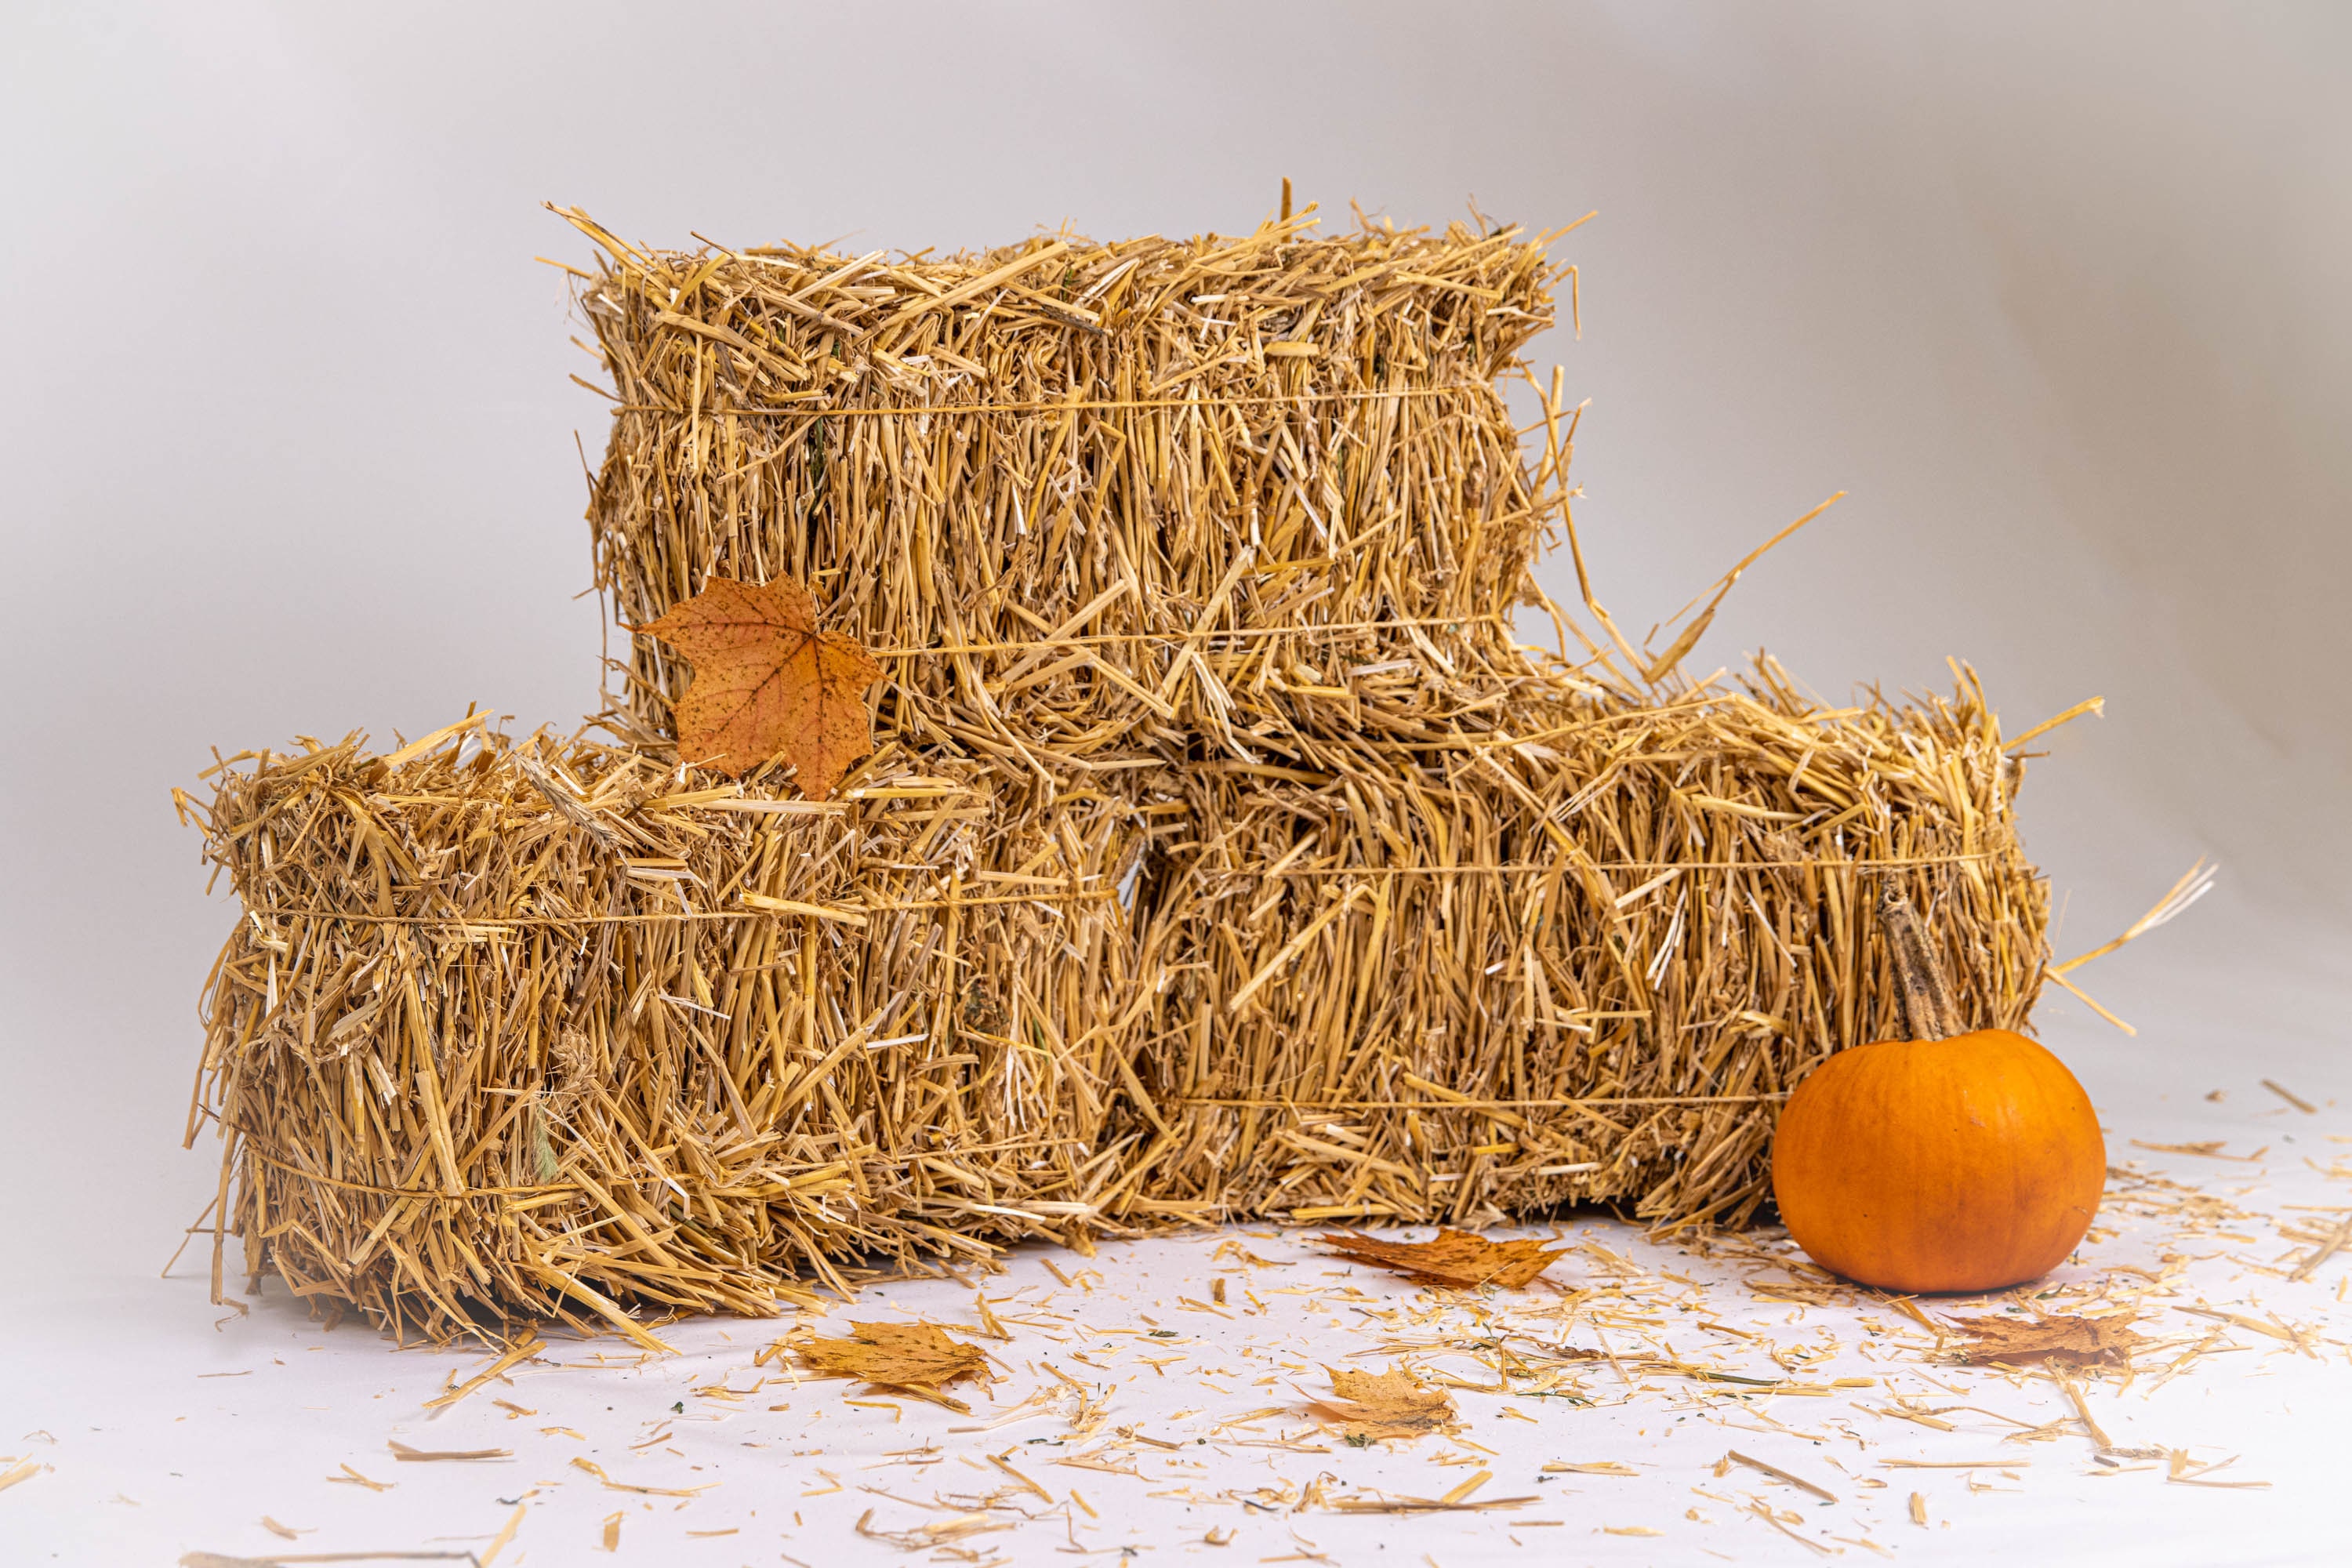 Straw Weavers Mini Straw Bale Bundle of 3 Natural Hay for Autumn Fall Harvest, Craft Decoration and Display 2.5 in. x 3.5 in x 2.5 in